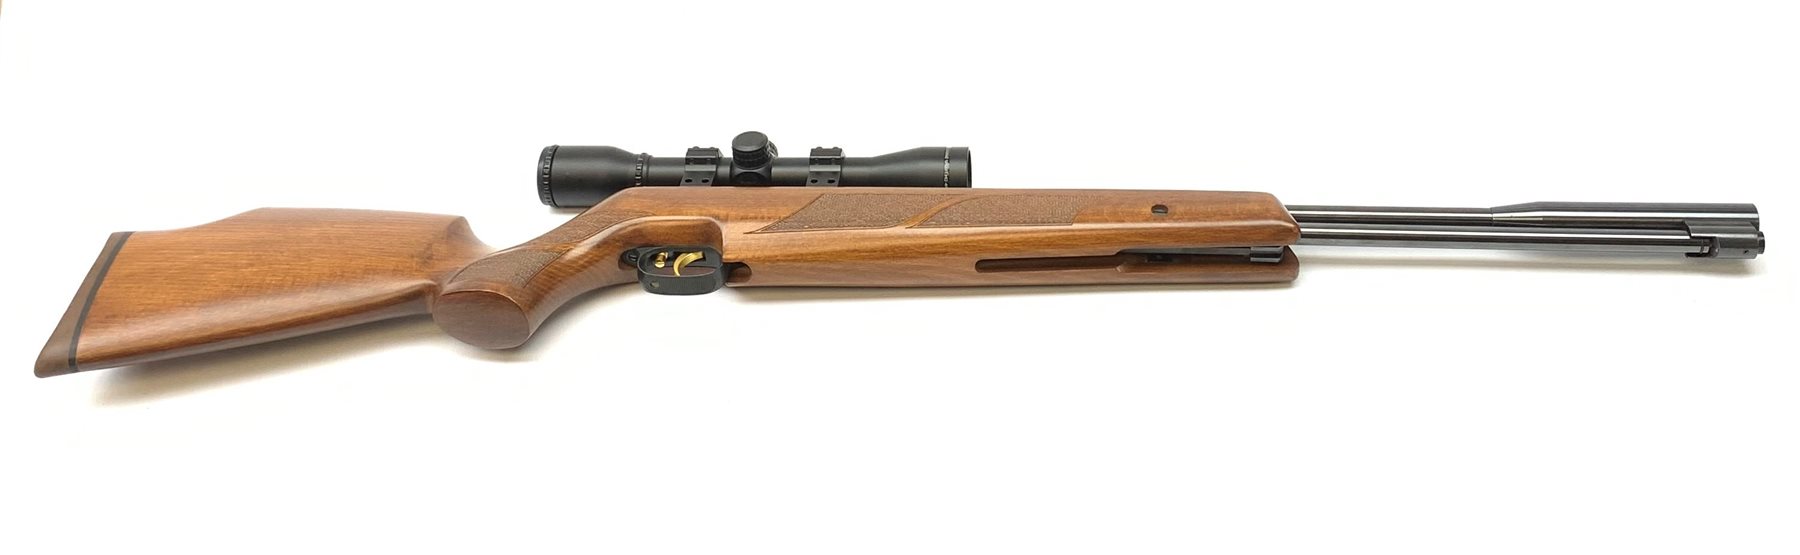 Weirauch HW97K .22 air rifle with under lever action, chequered pistol grip and fore-end, fitted int - Image 2 of 7